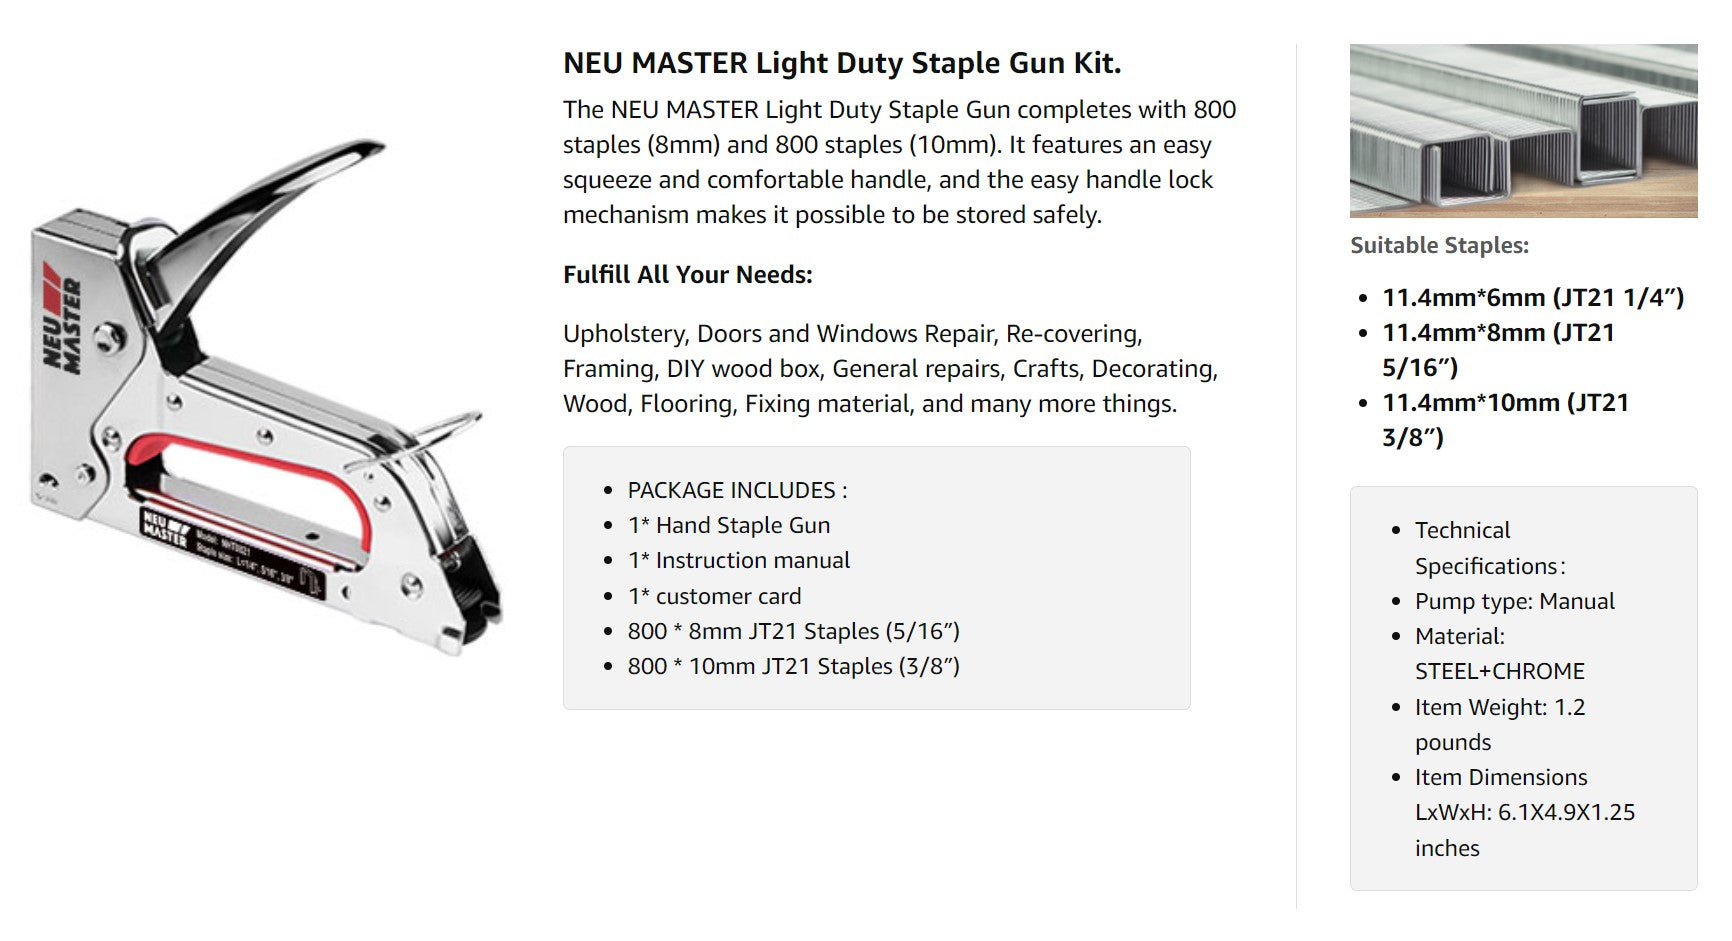 Staple Gun NEU MASTER, Light Duty Stapler Kit Come with 1600 pcs 5/16,3/8 inch JT21 Staple Strip, All Steel Tacker for General Repairs, Crafts, Upholstery, Decorating.